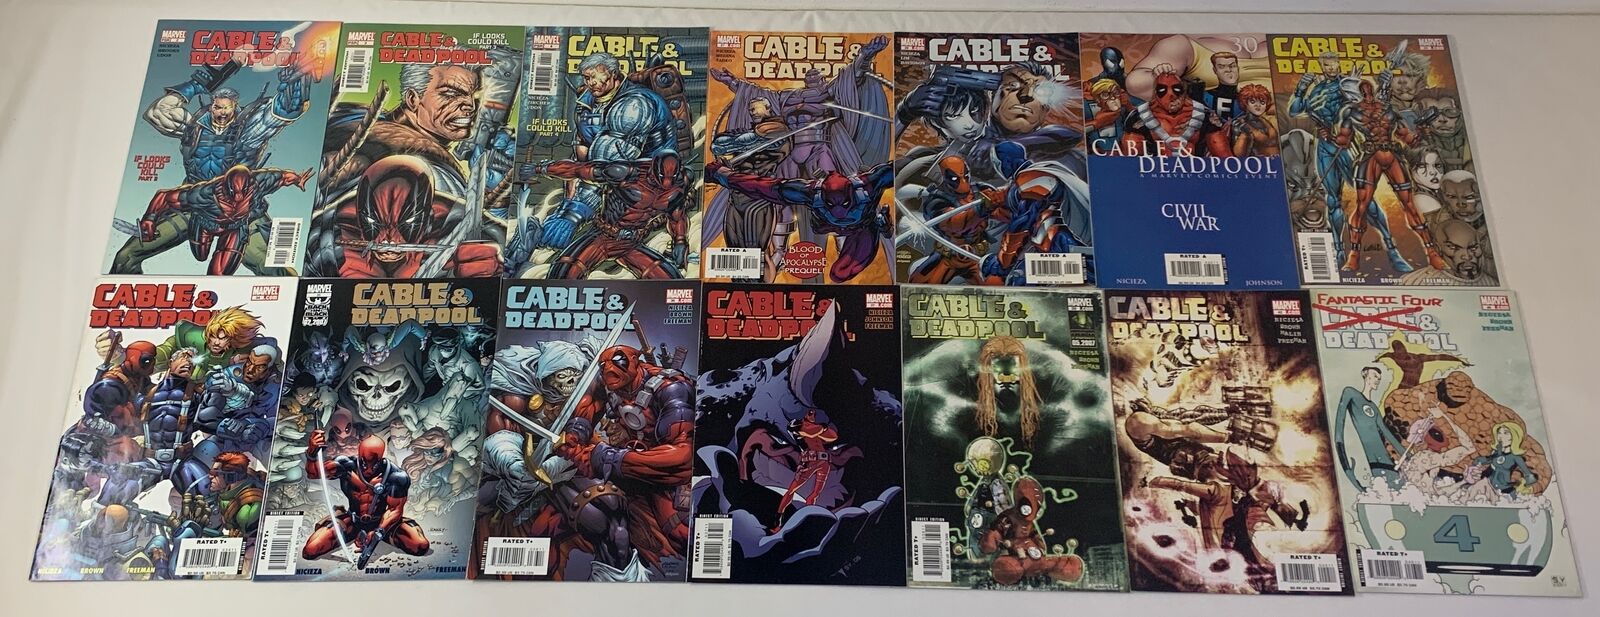 Marvel CABLE AND DEADPOOL #2 3 4 27 29 30 33 34 35 36 37 39 42 46